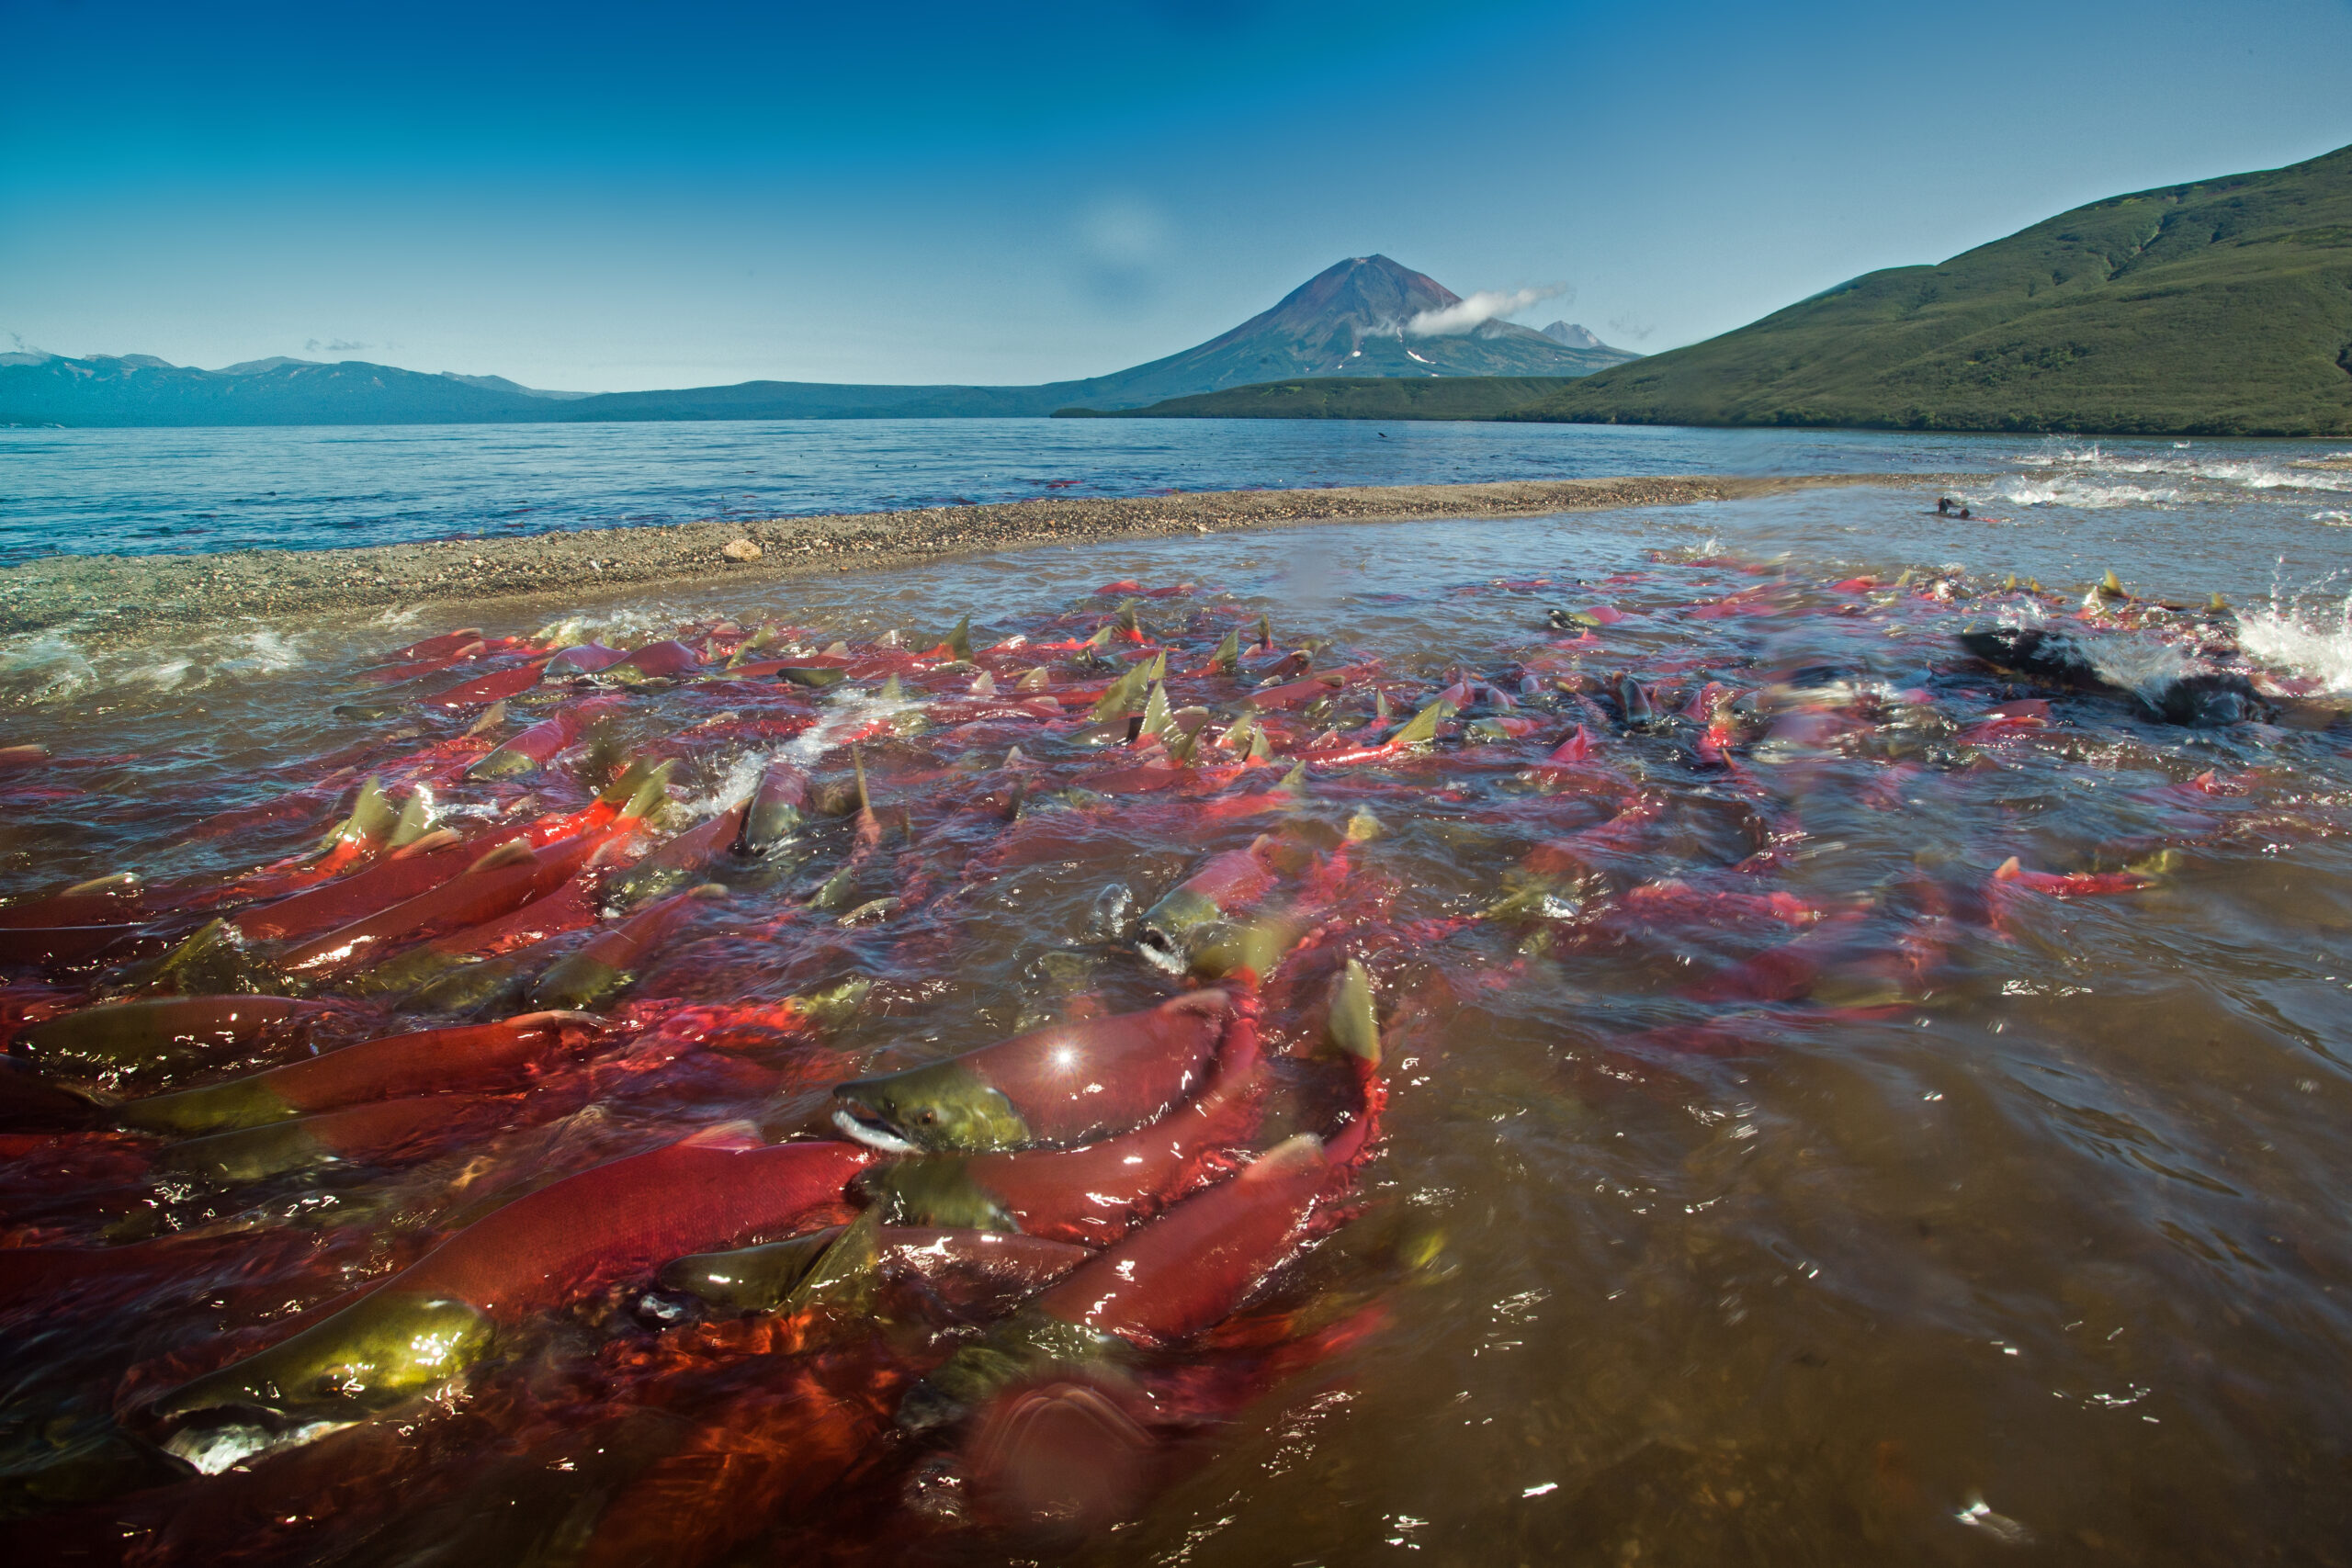 Salmon swim in a large school, some swimming over others at the surface of the water. Mt. Rainier is seen in the far distance